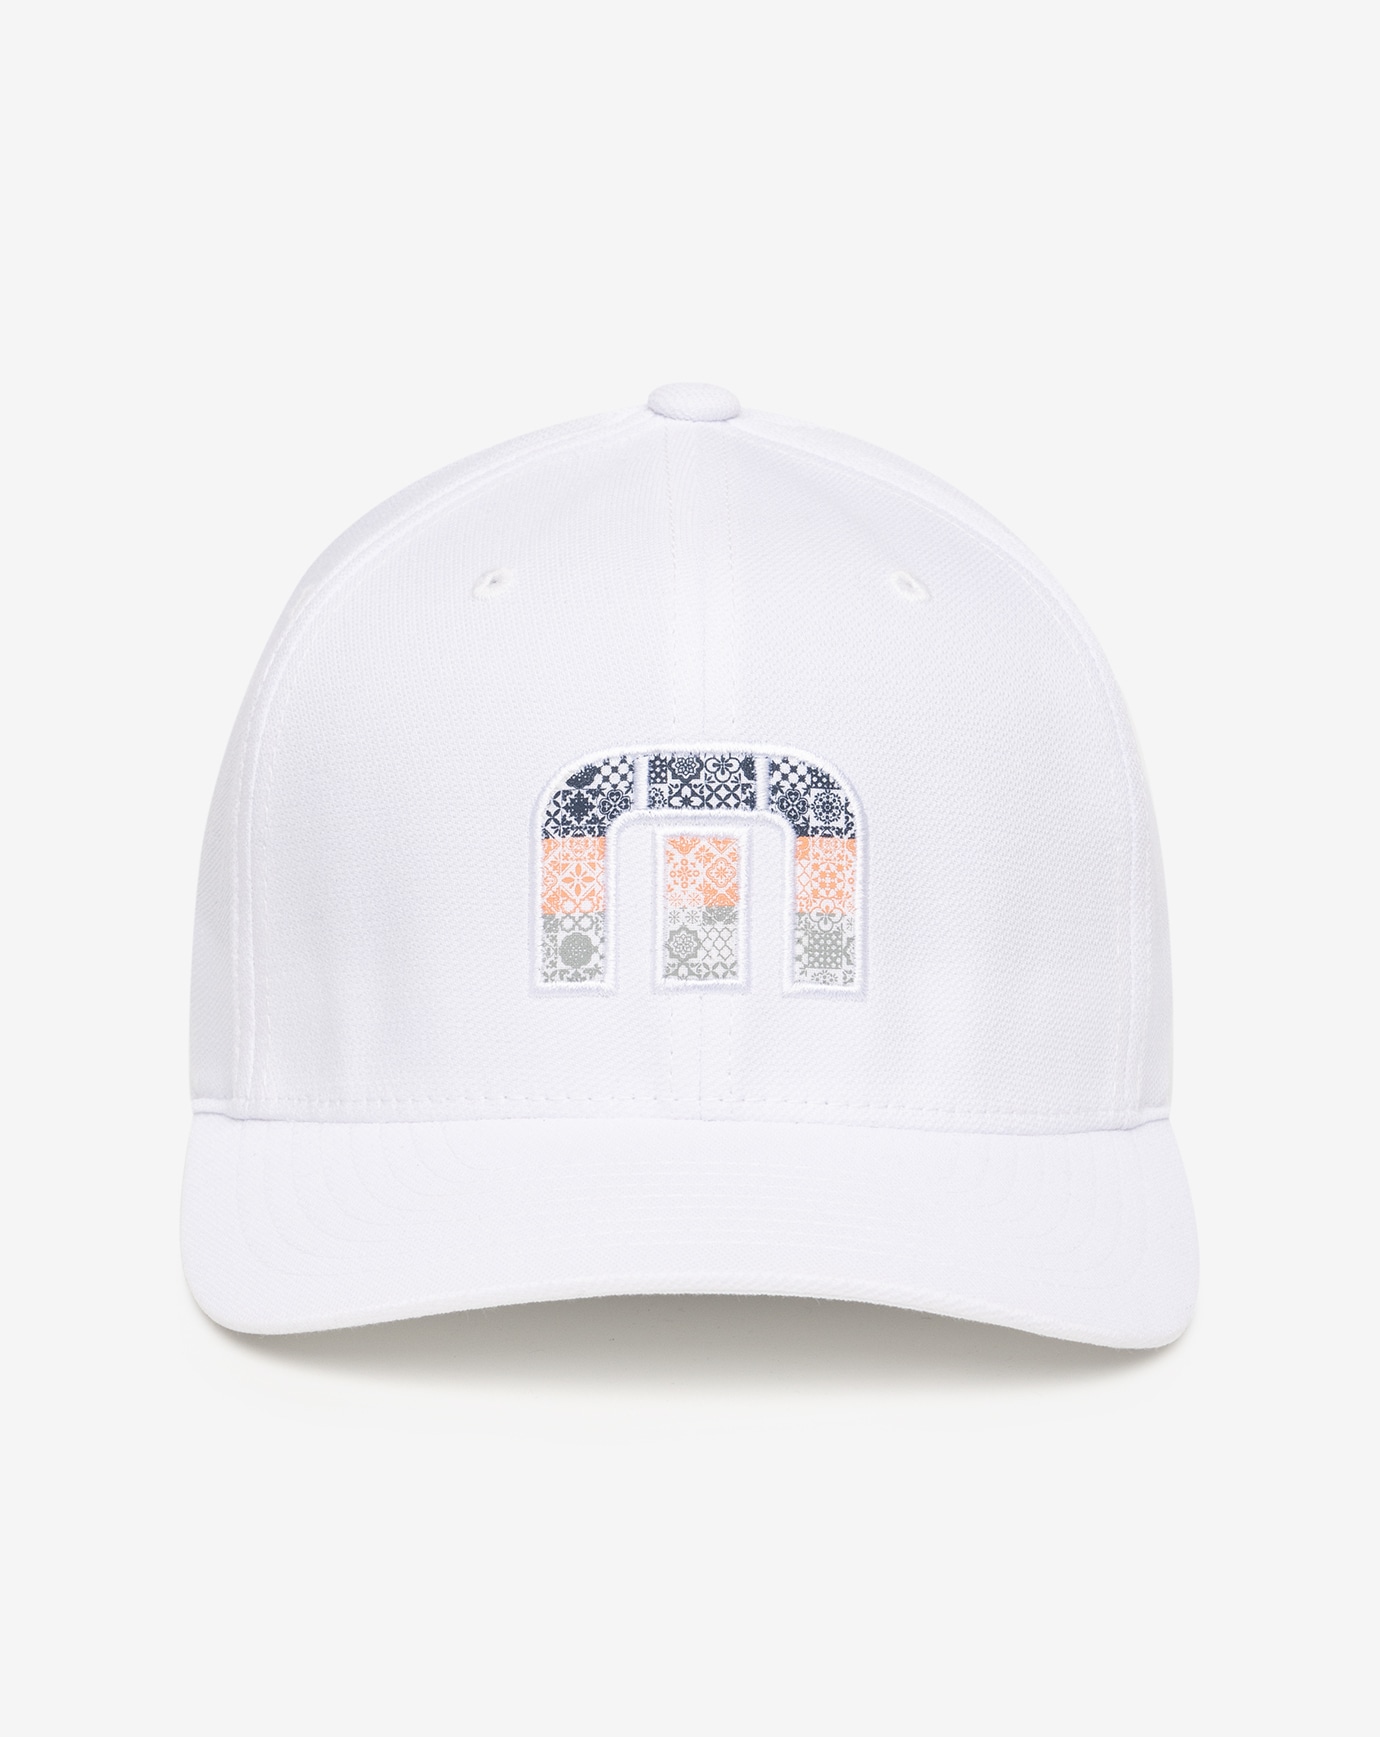 SWIM WITH DOLPHINS YOUTH HAT_1BX112_1WHT_